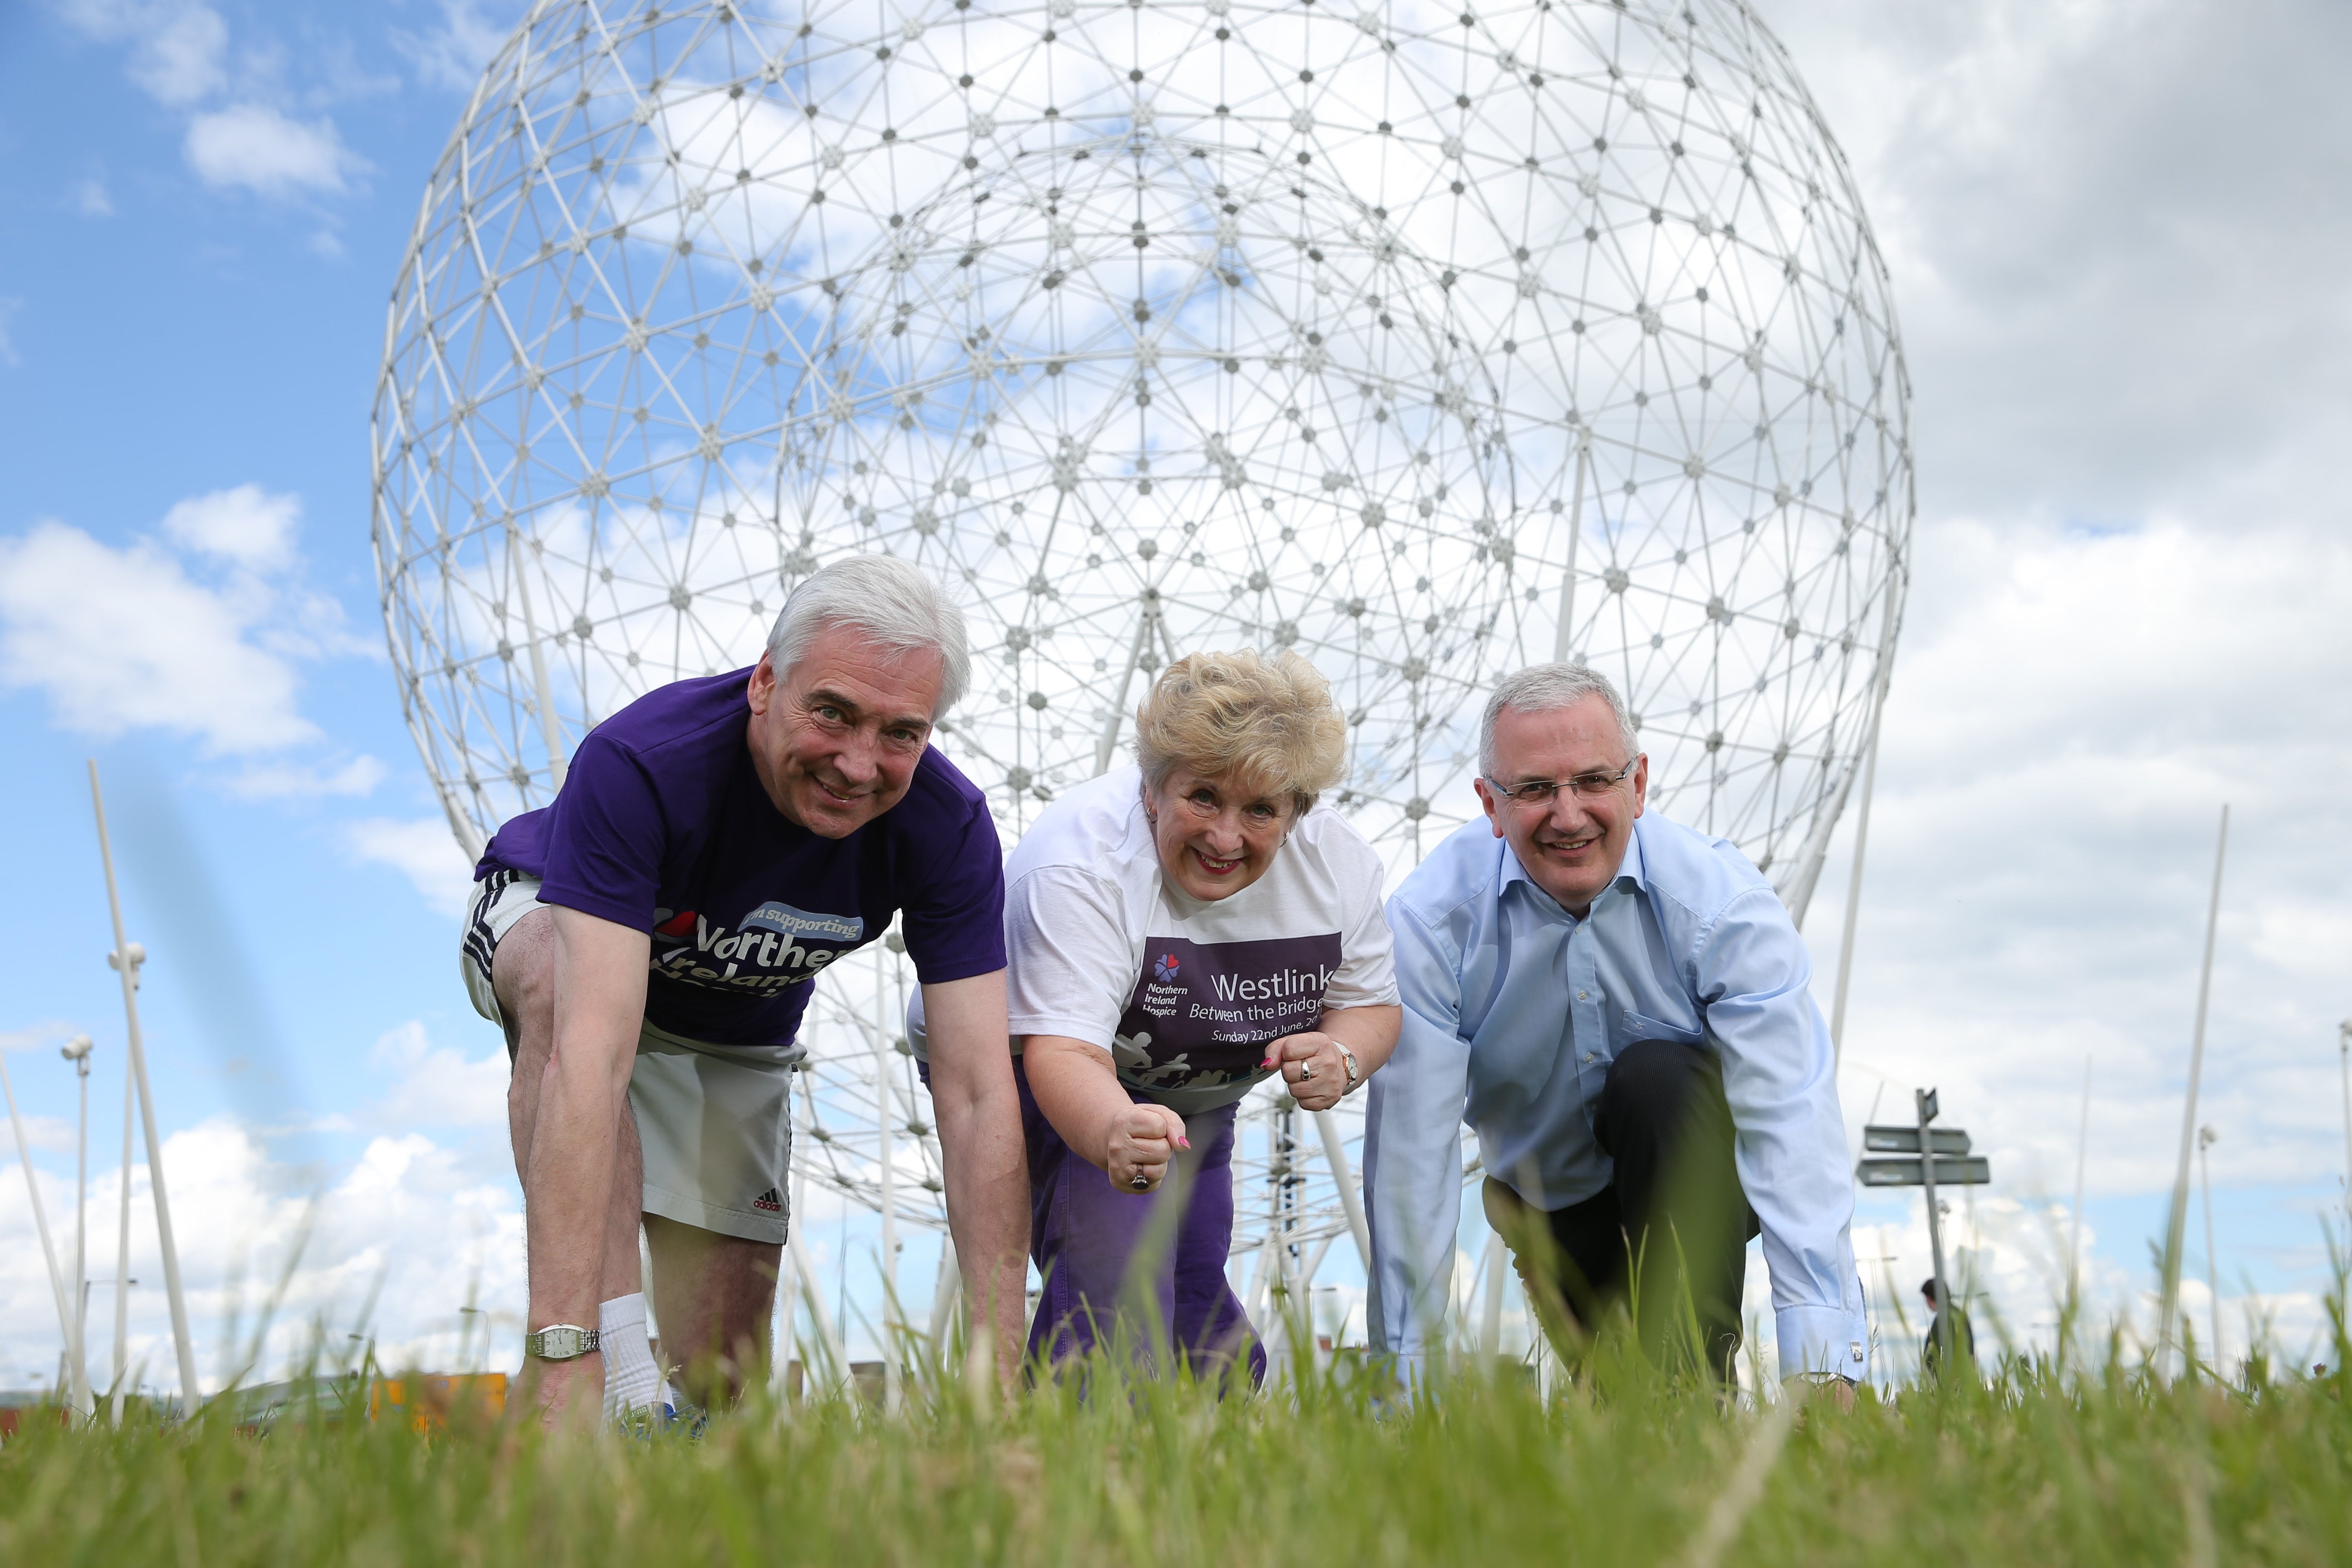 Transport Minister  Danny Kennedy joined UTV’s Paul Clark and actress Olivia Nash at the Rise sculpture in Belfast’s Westlink - to get behind the Northern Ireland  Hospice  challenge